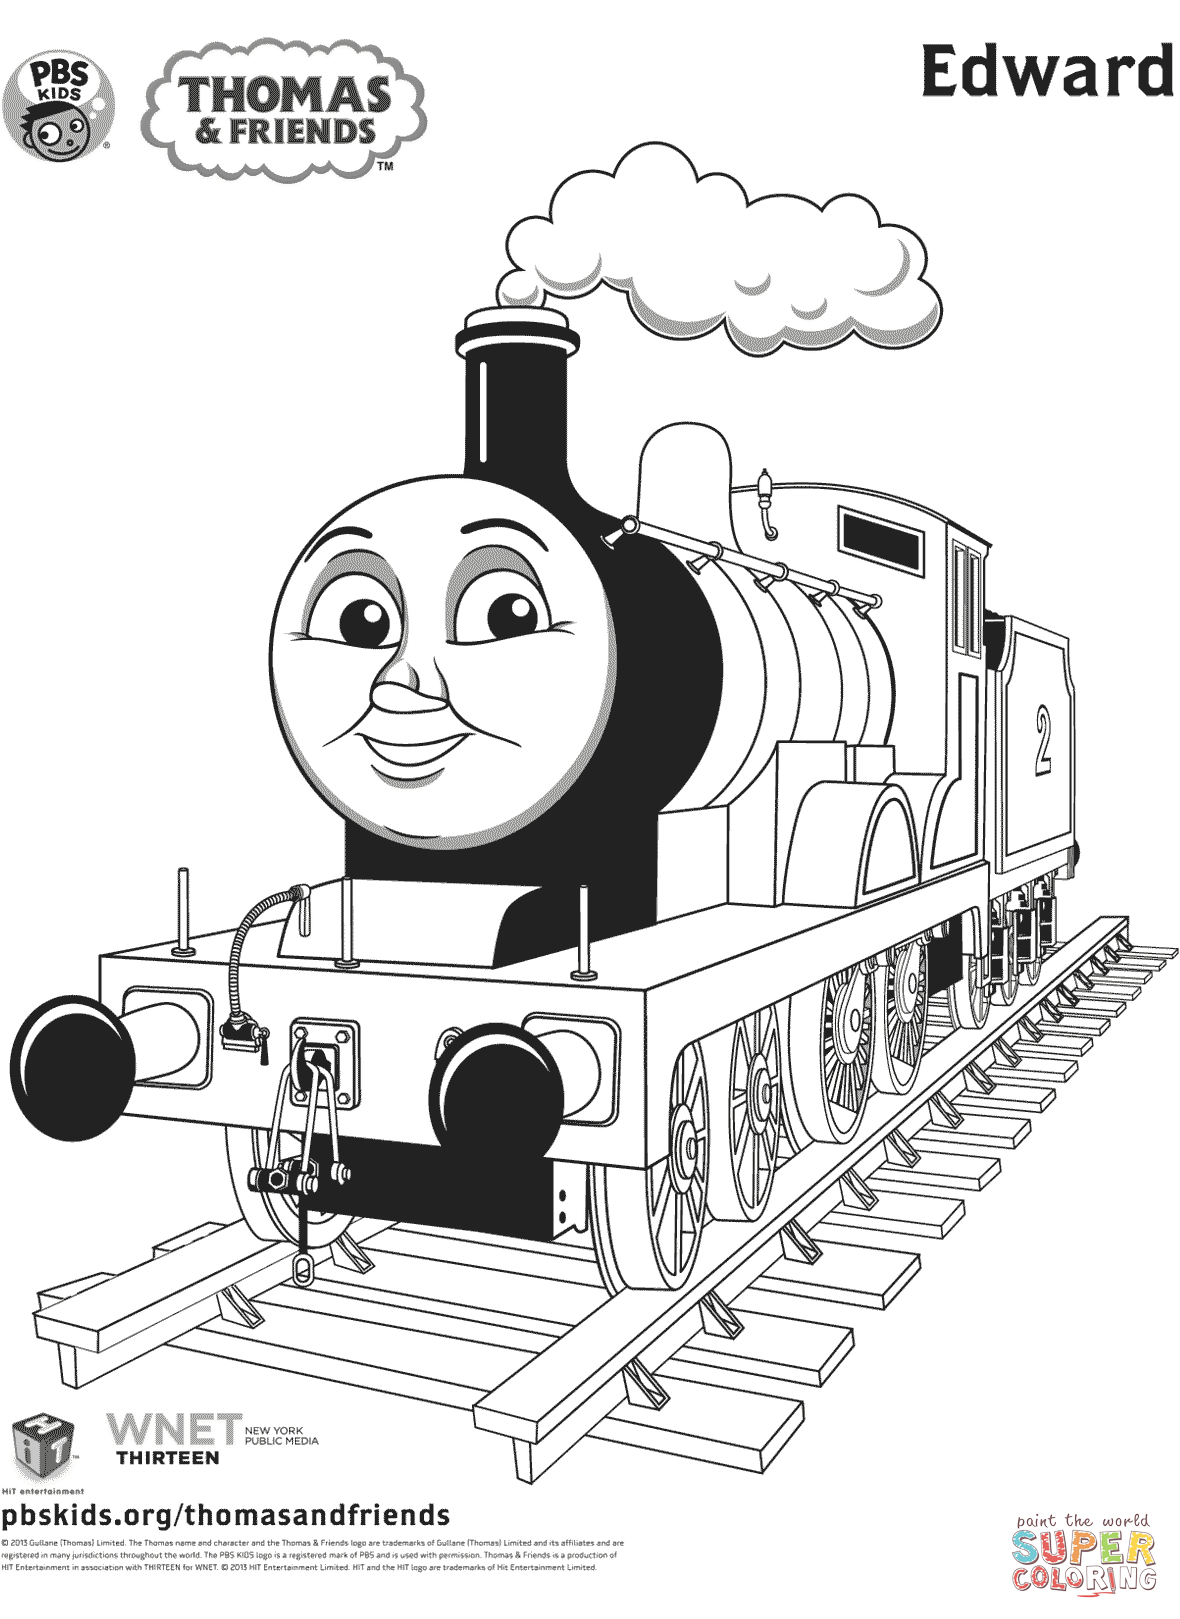 Thomas Coloring Pages Printable Edward From Thomas Friends Coloring Page Free Printable Coloring